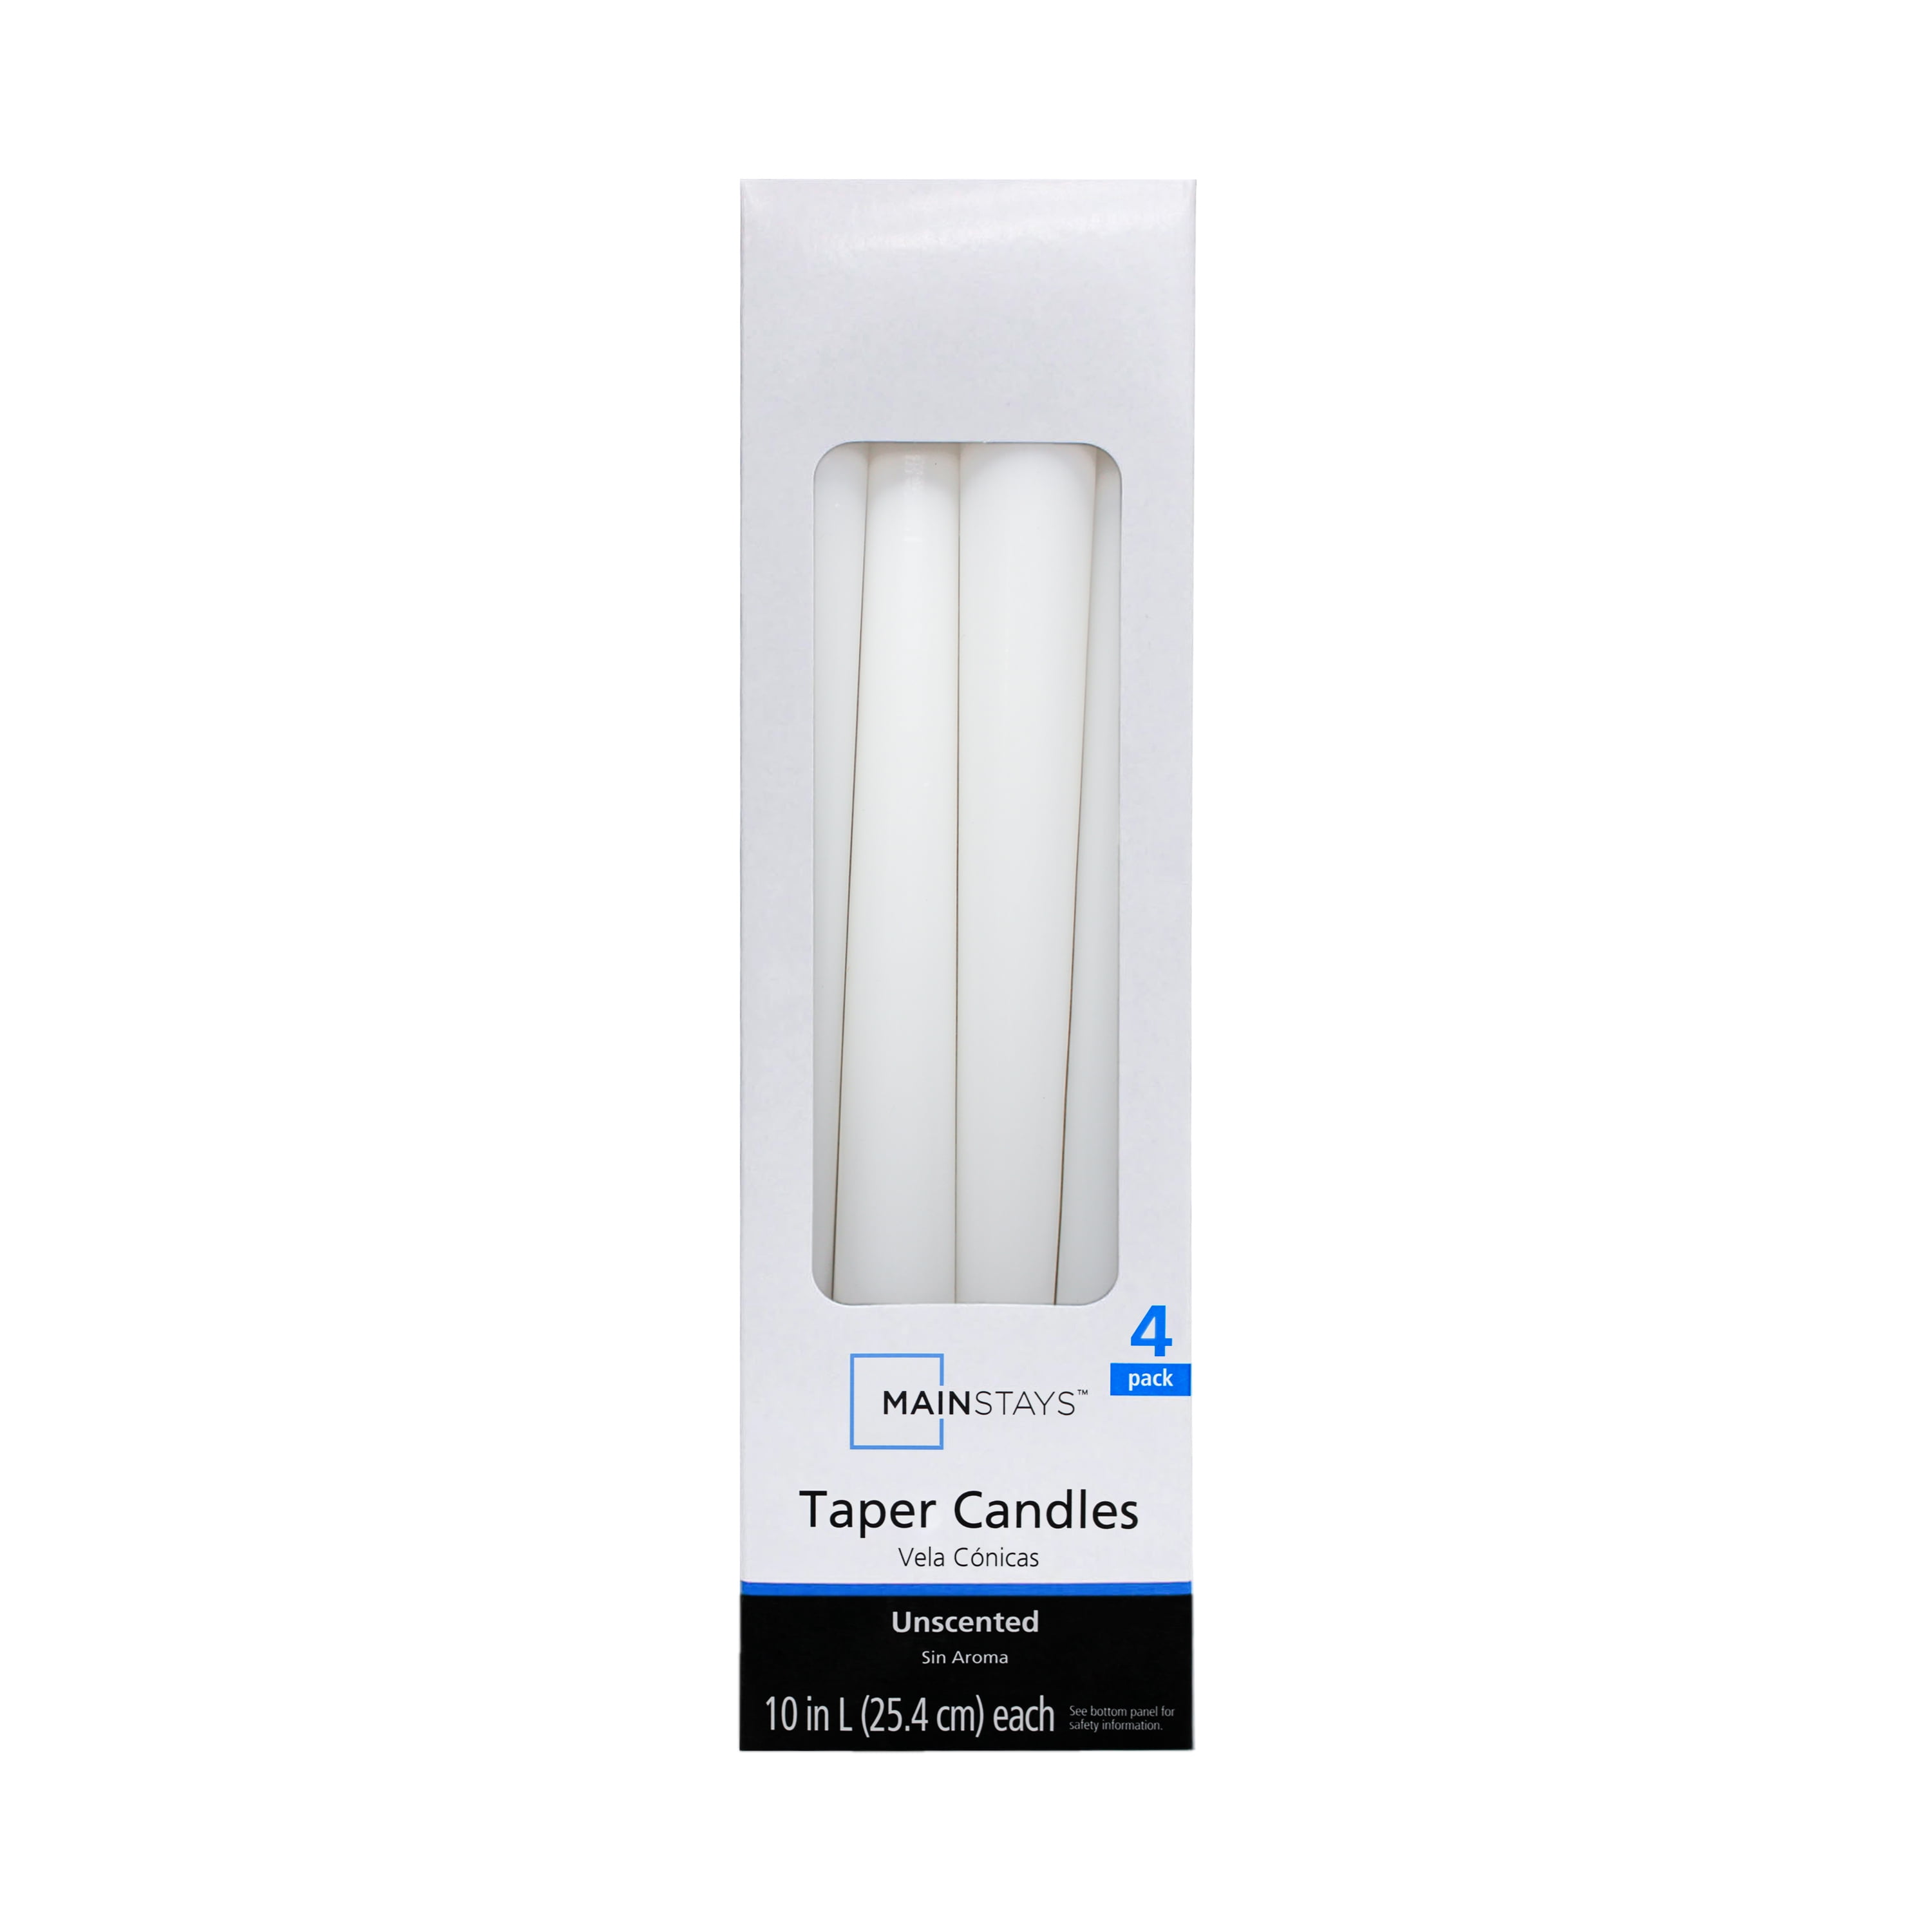 Mainstays Unscented Taper Candle, White, 4-Pack, 10 inches Long